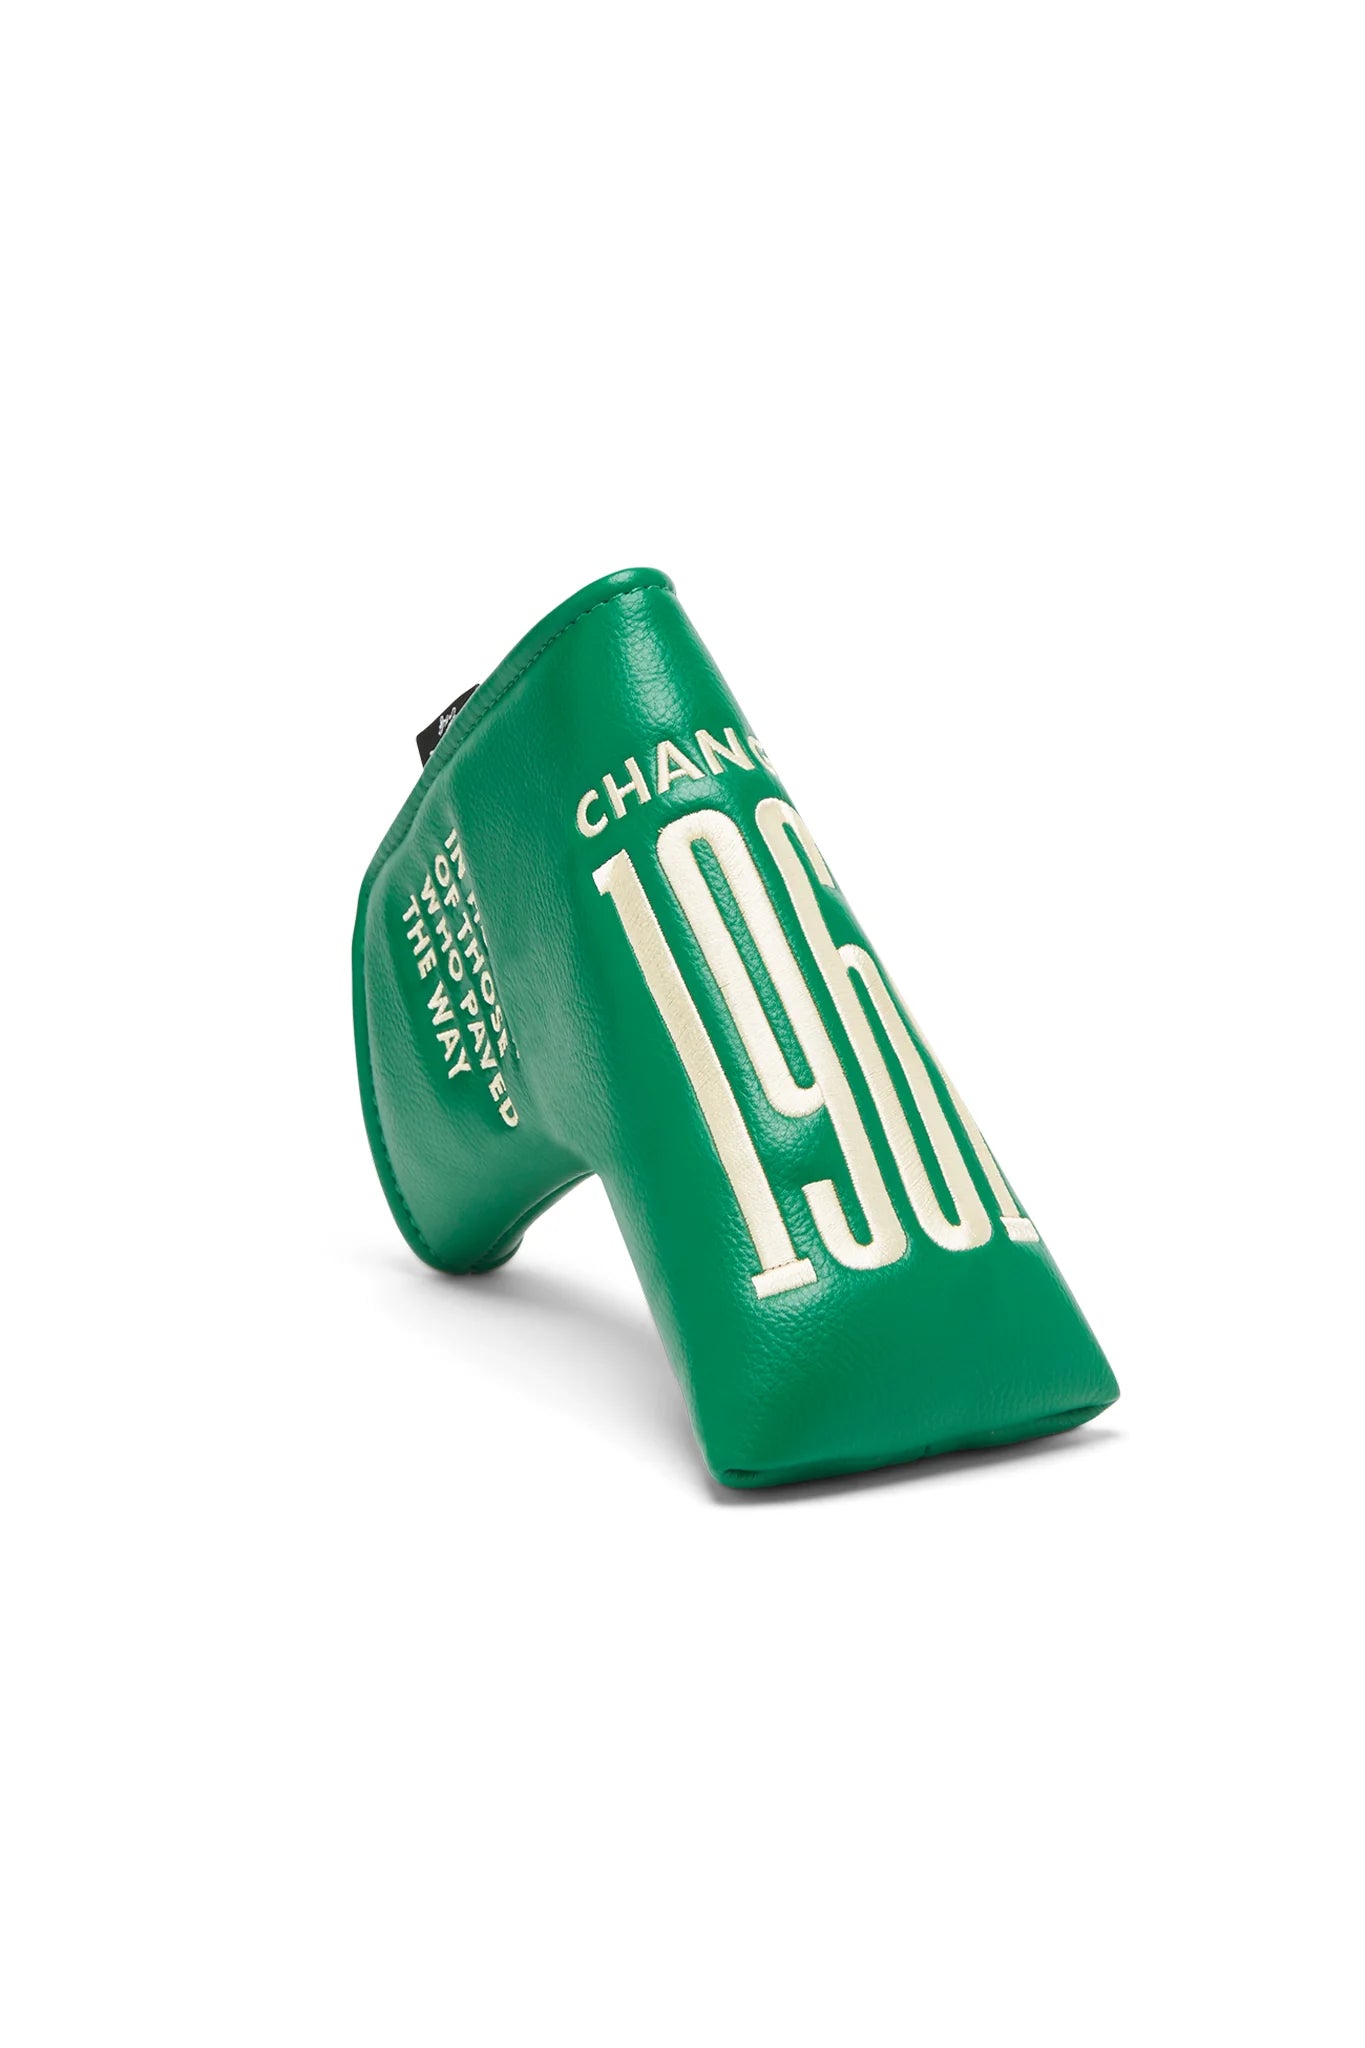 CHANGE.1961 Blade Putter Cover